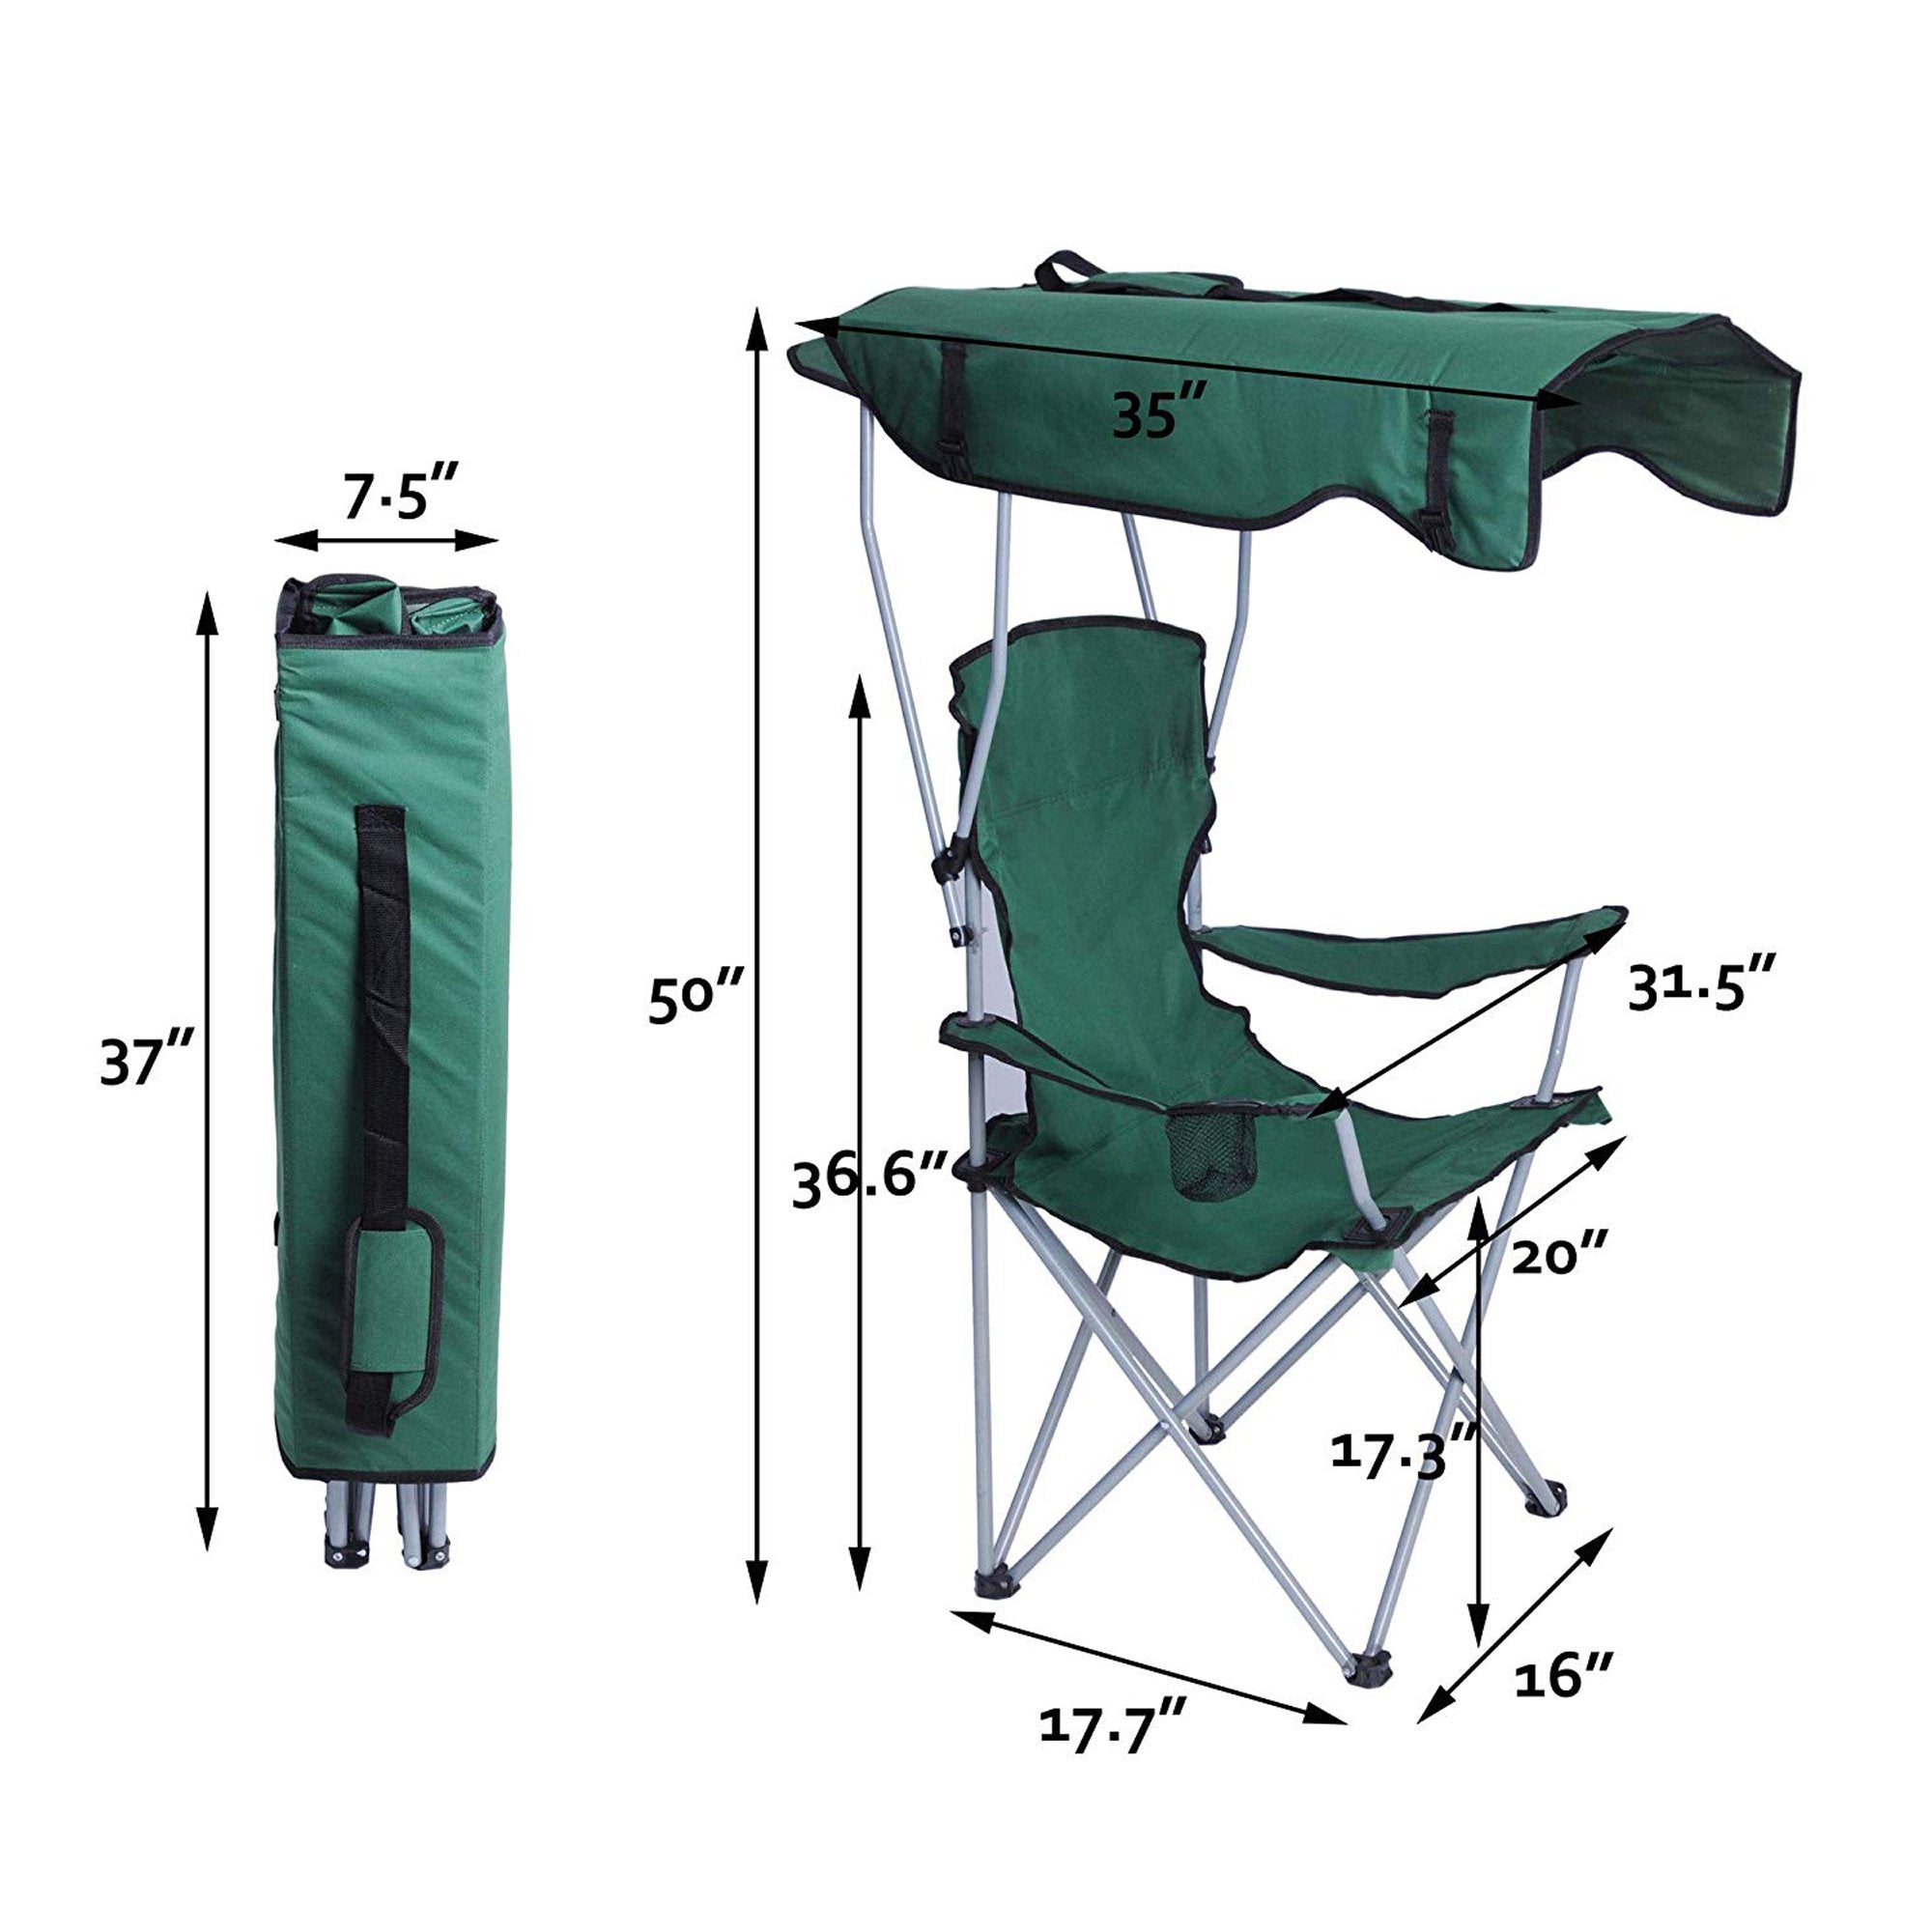 KARMAS PRODUCT Canopy Camping Fishing Beach Chair Folding Durable Sunscreen Outdoor Patio Lawn Seat with Cup Holder， Green